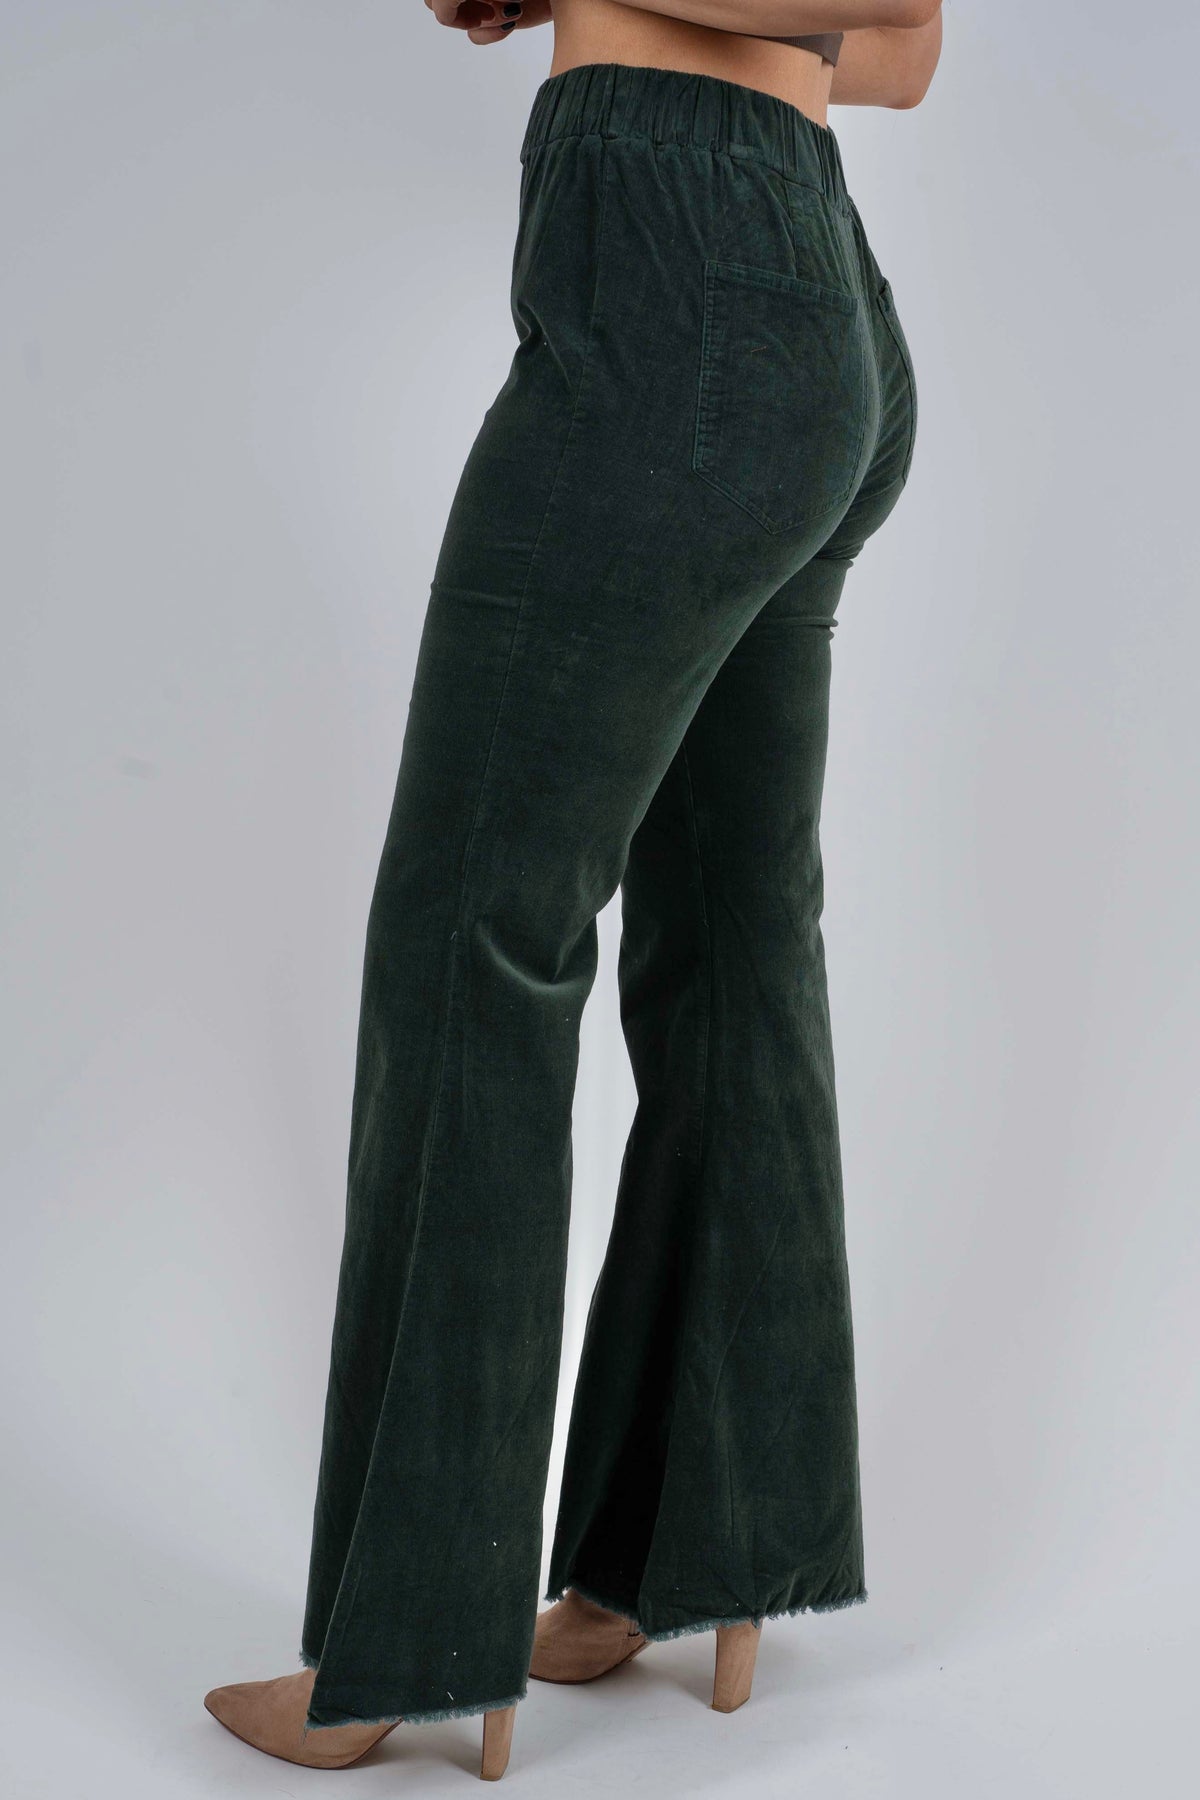 Around Downtown Corded Pants (Forest)